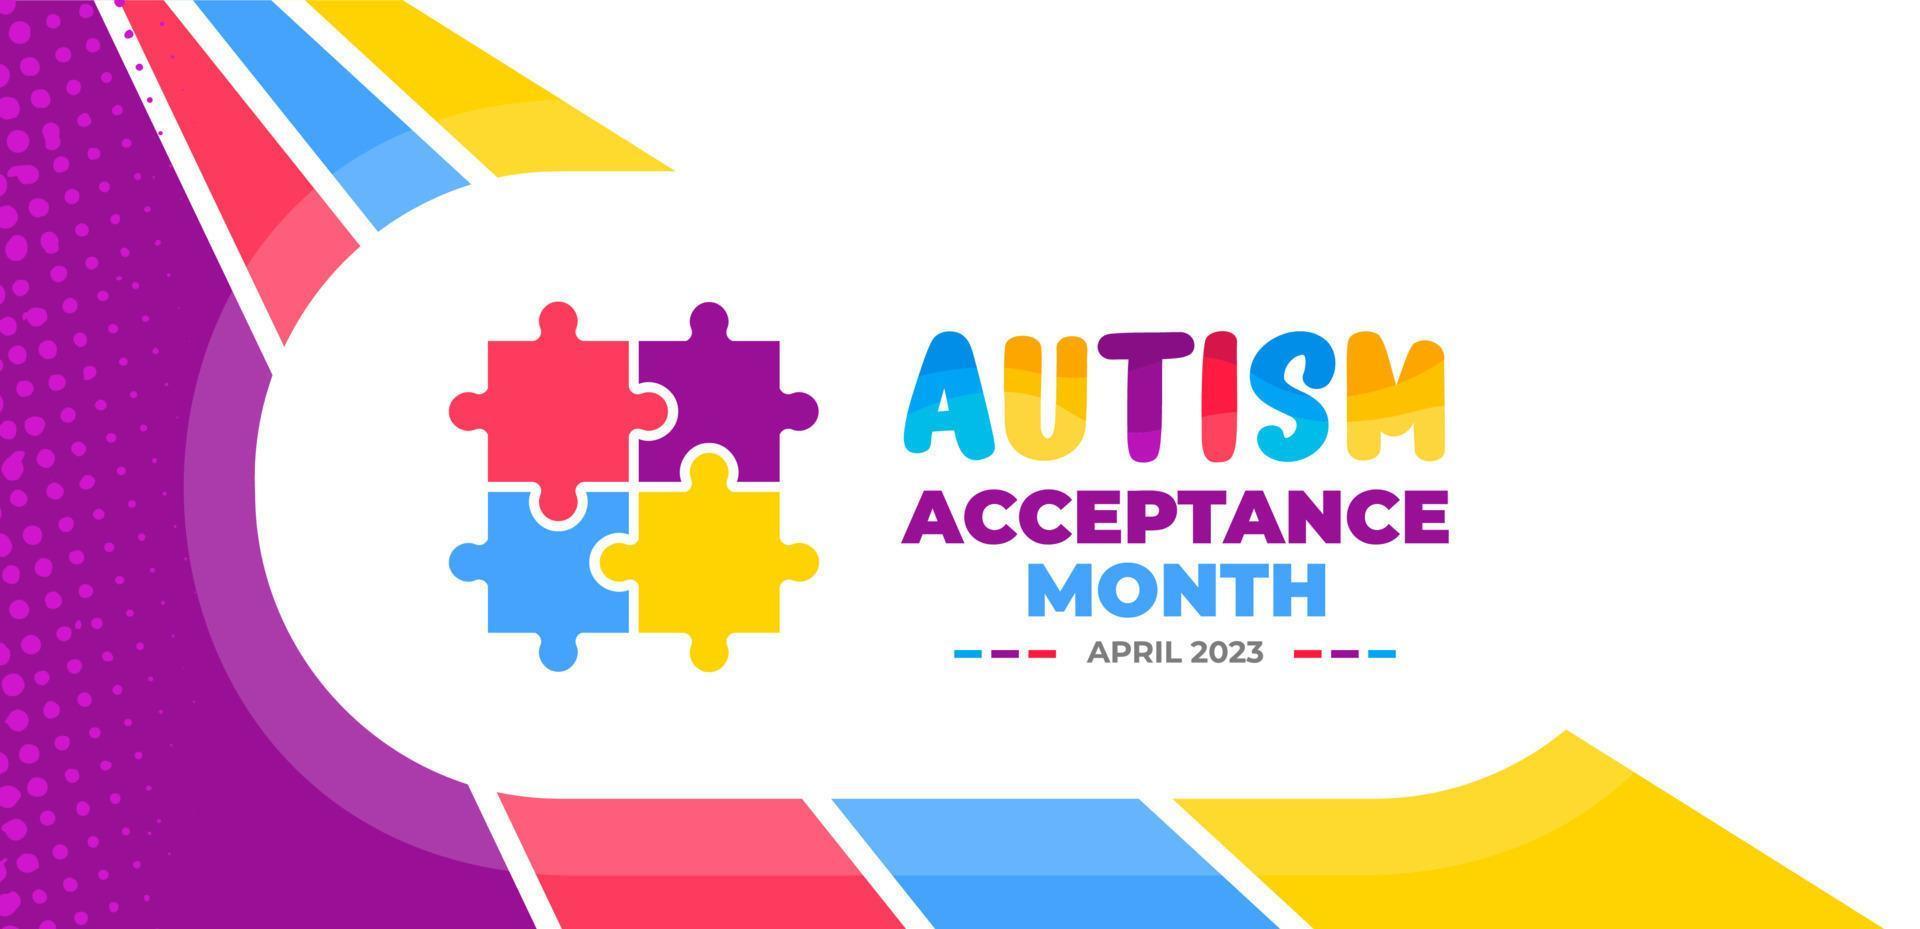 Autism Acceptance Month background for banner design template celebrate in april. vector